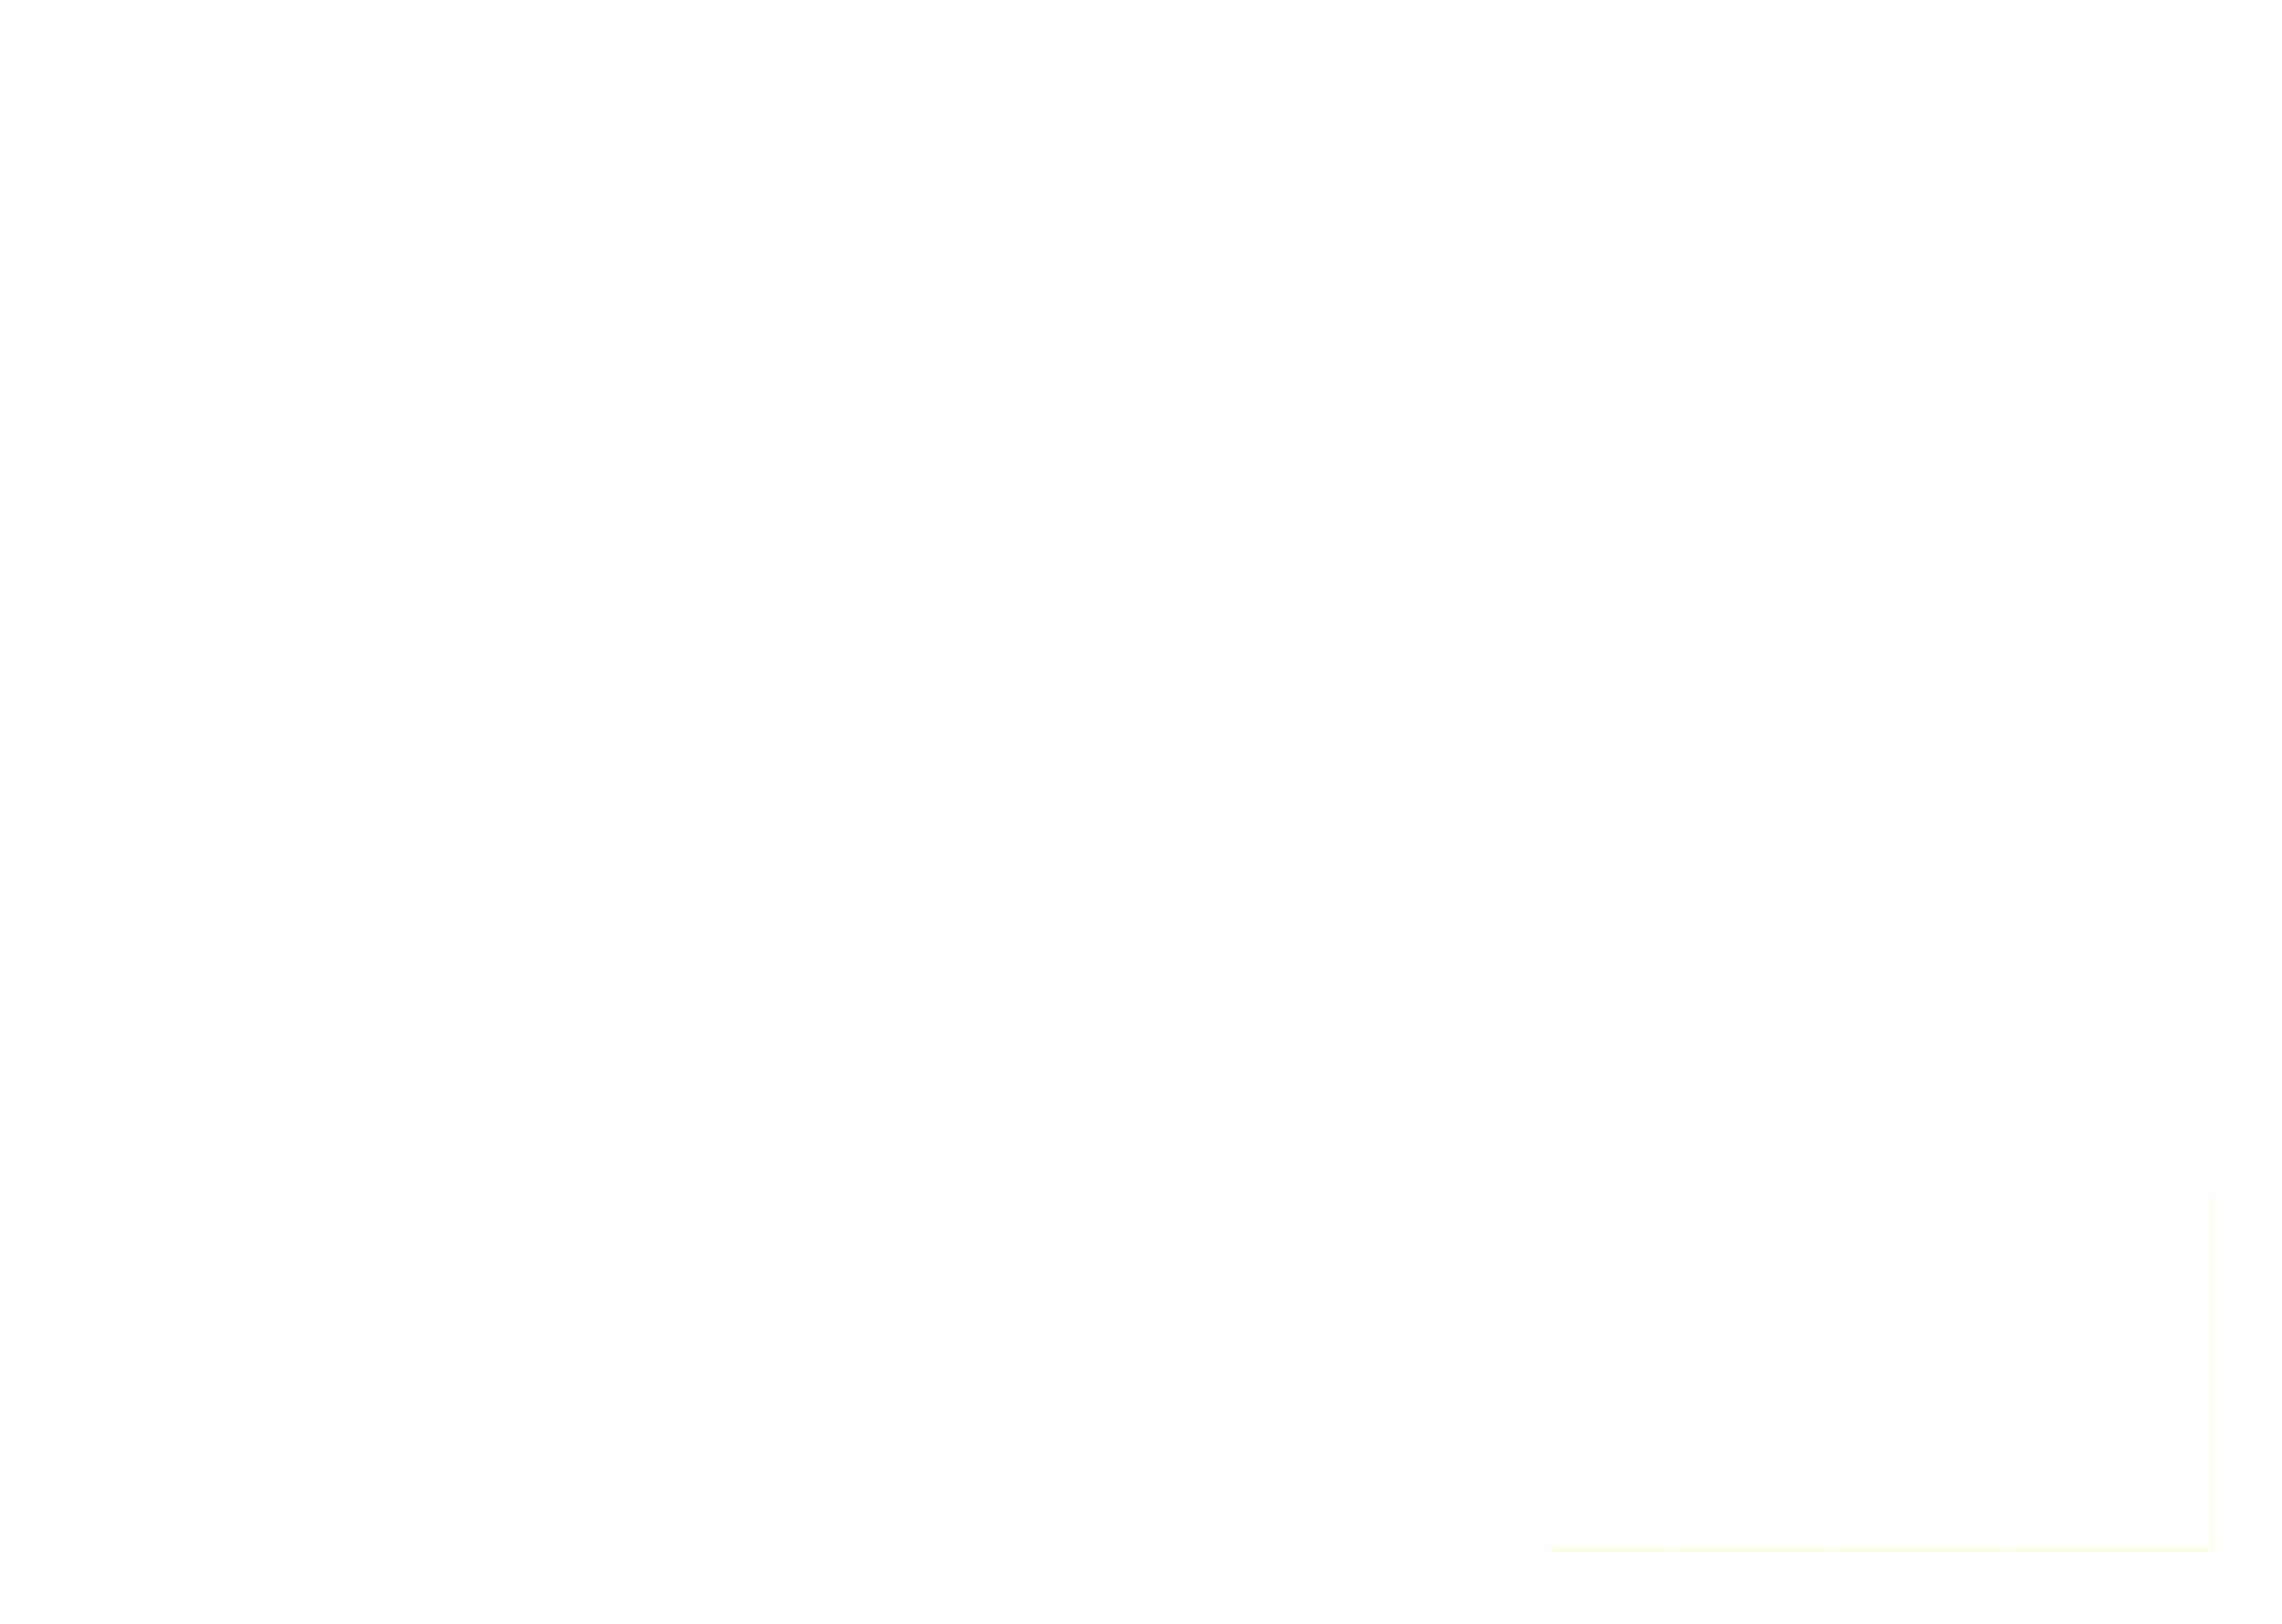 POM COMPOSITE BEARING DRAWINGS